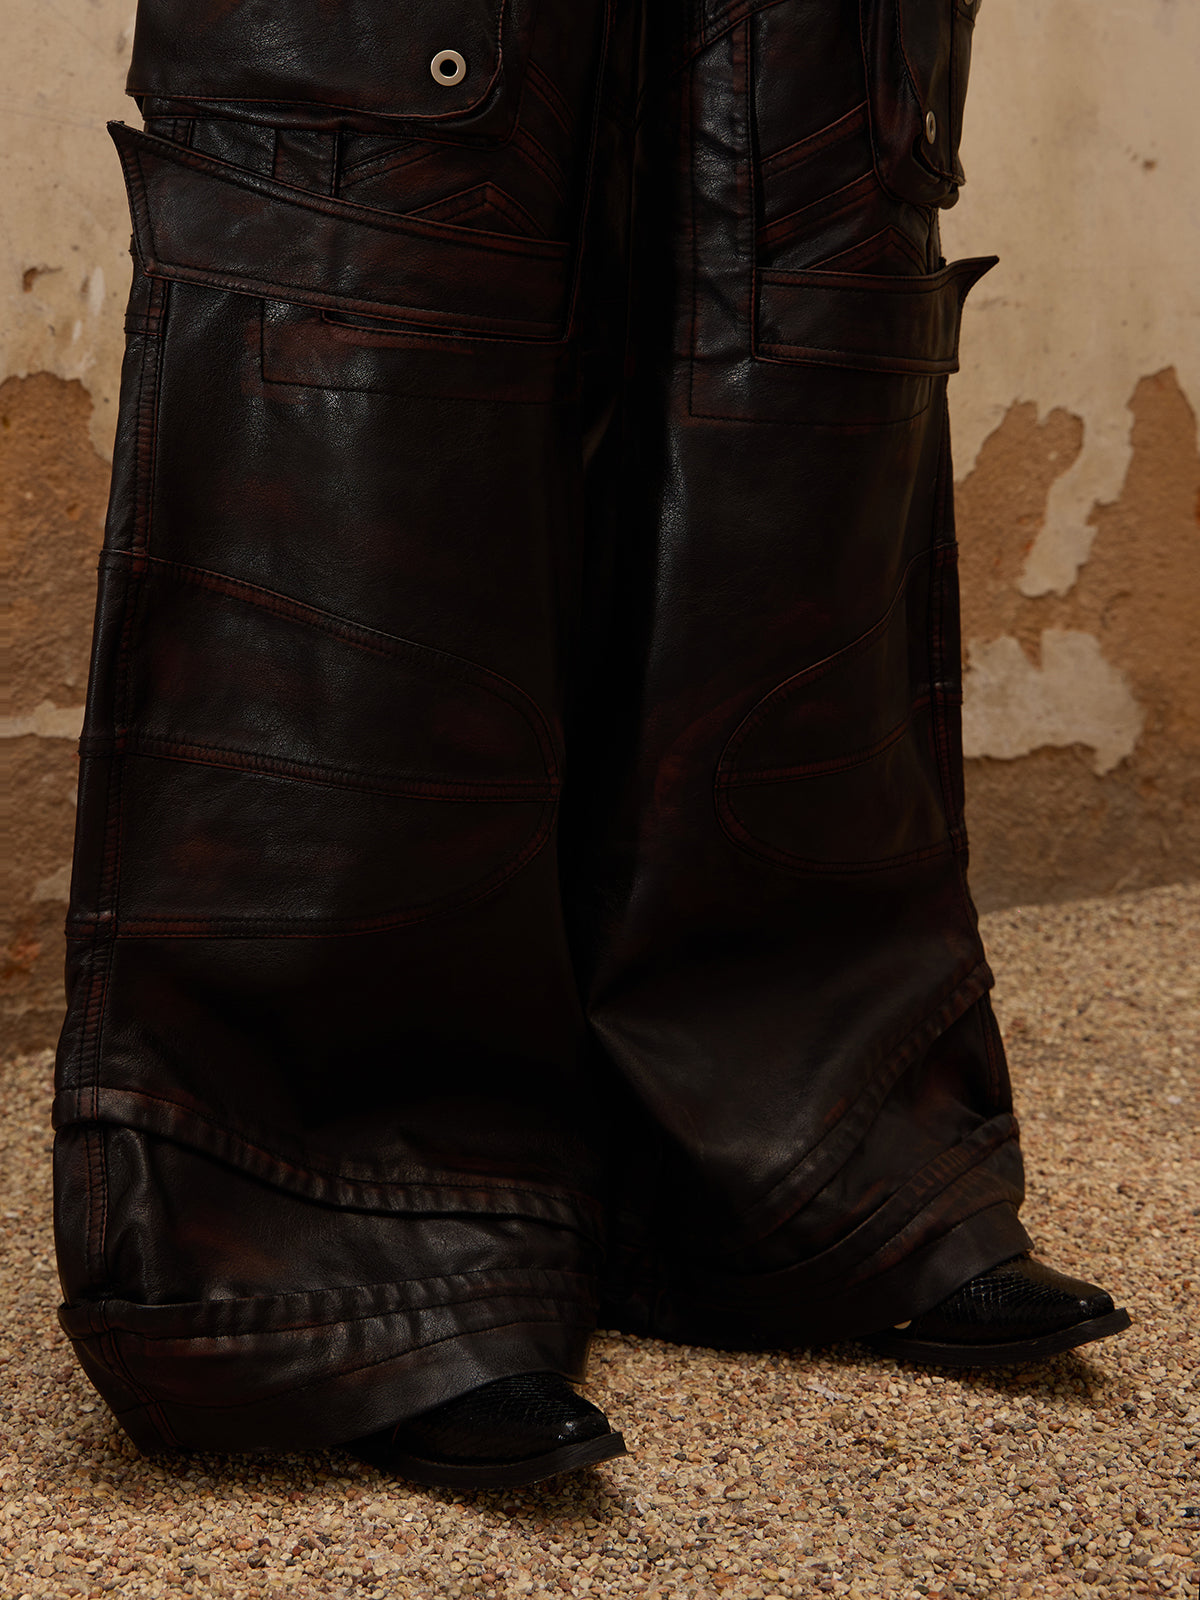 Personsoul Beetle Faxu-Leather Pant